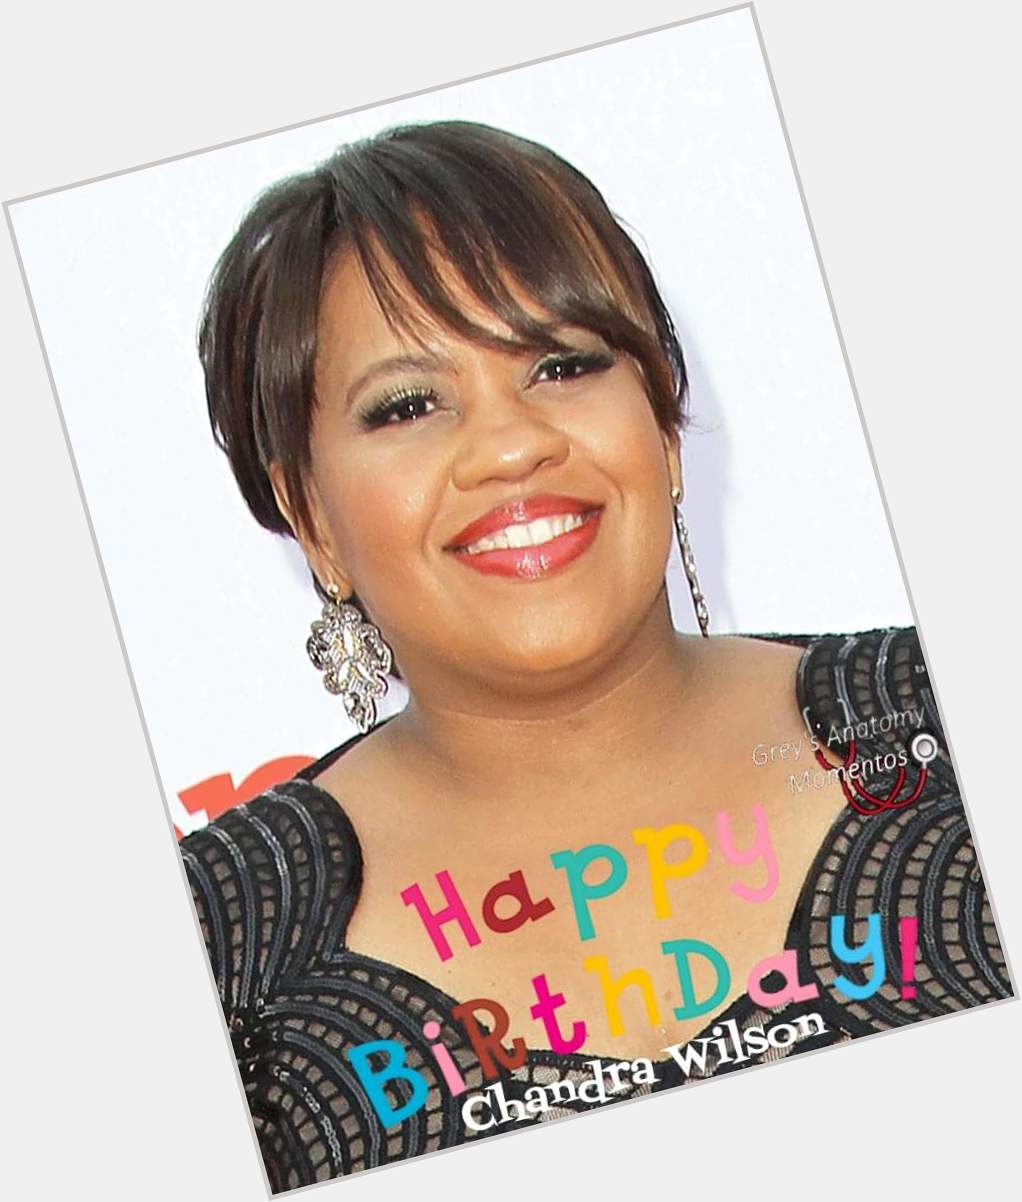 Wishing a very happy birthday to the incomparable Chandra Wilson!       